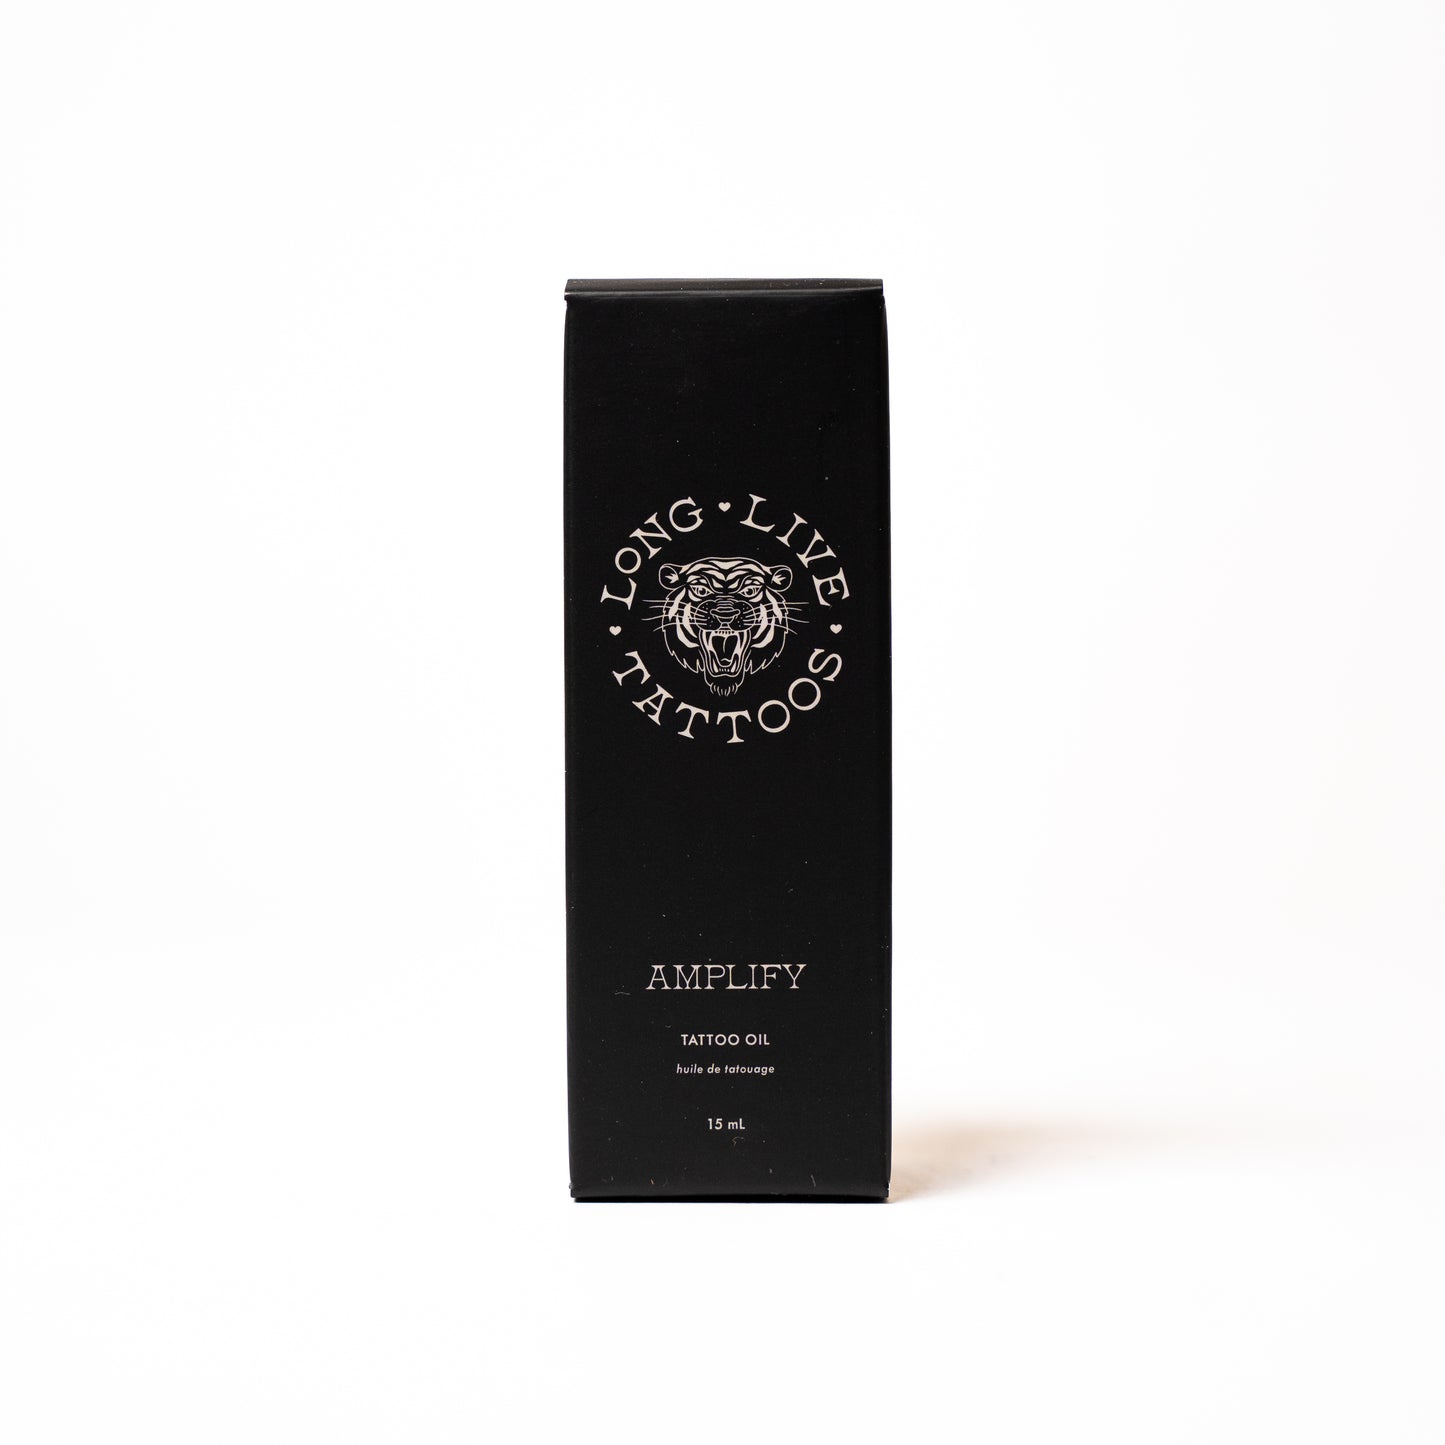 AMPILIFY Oil